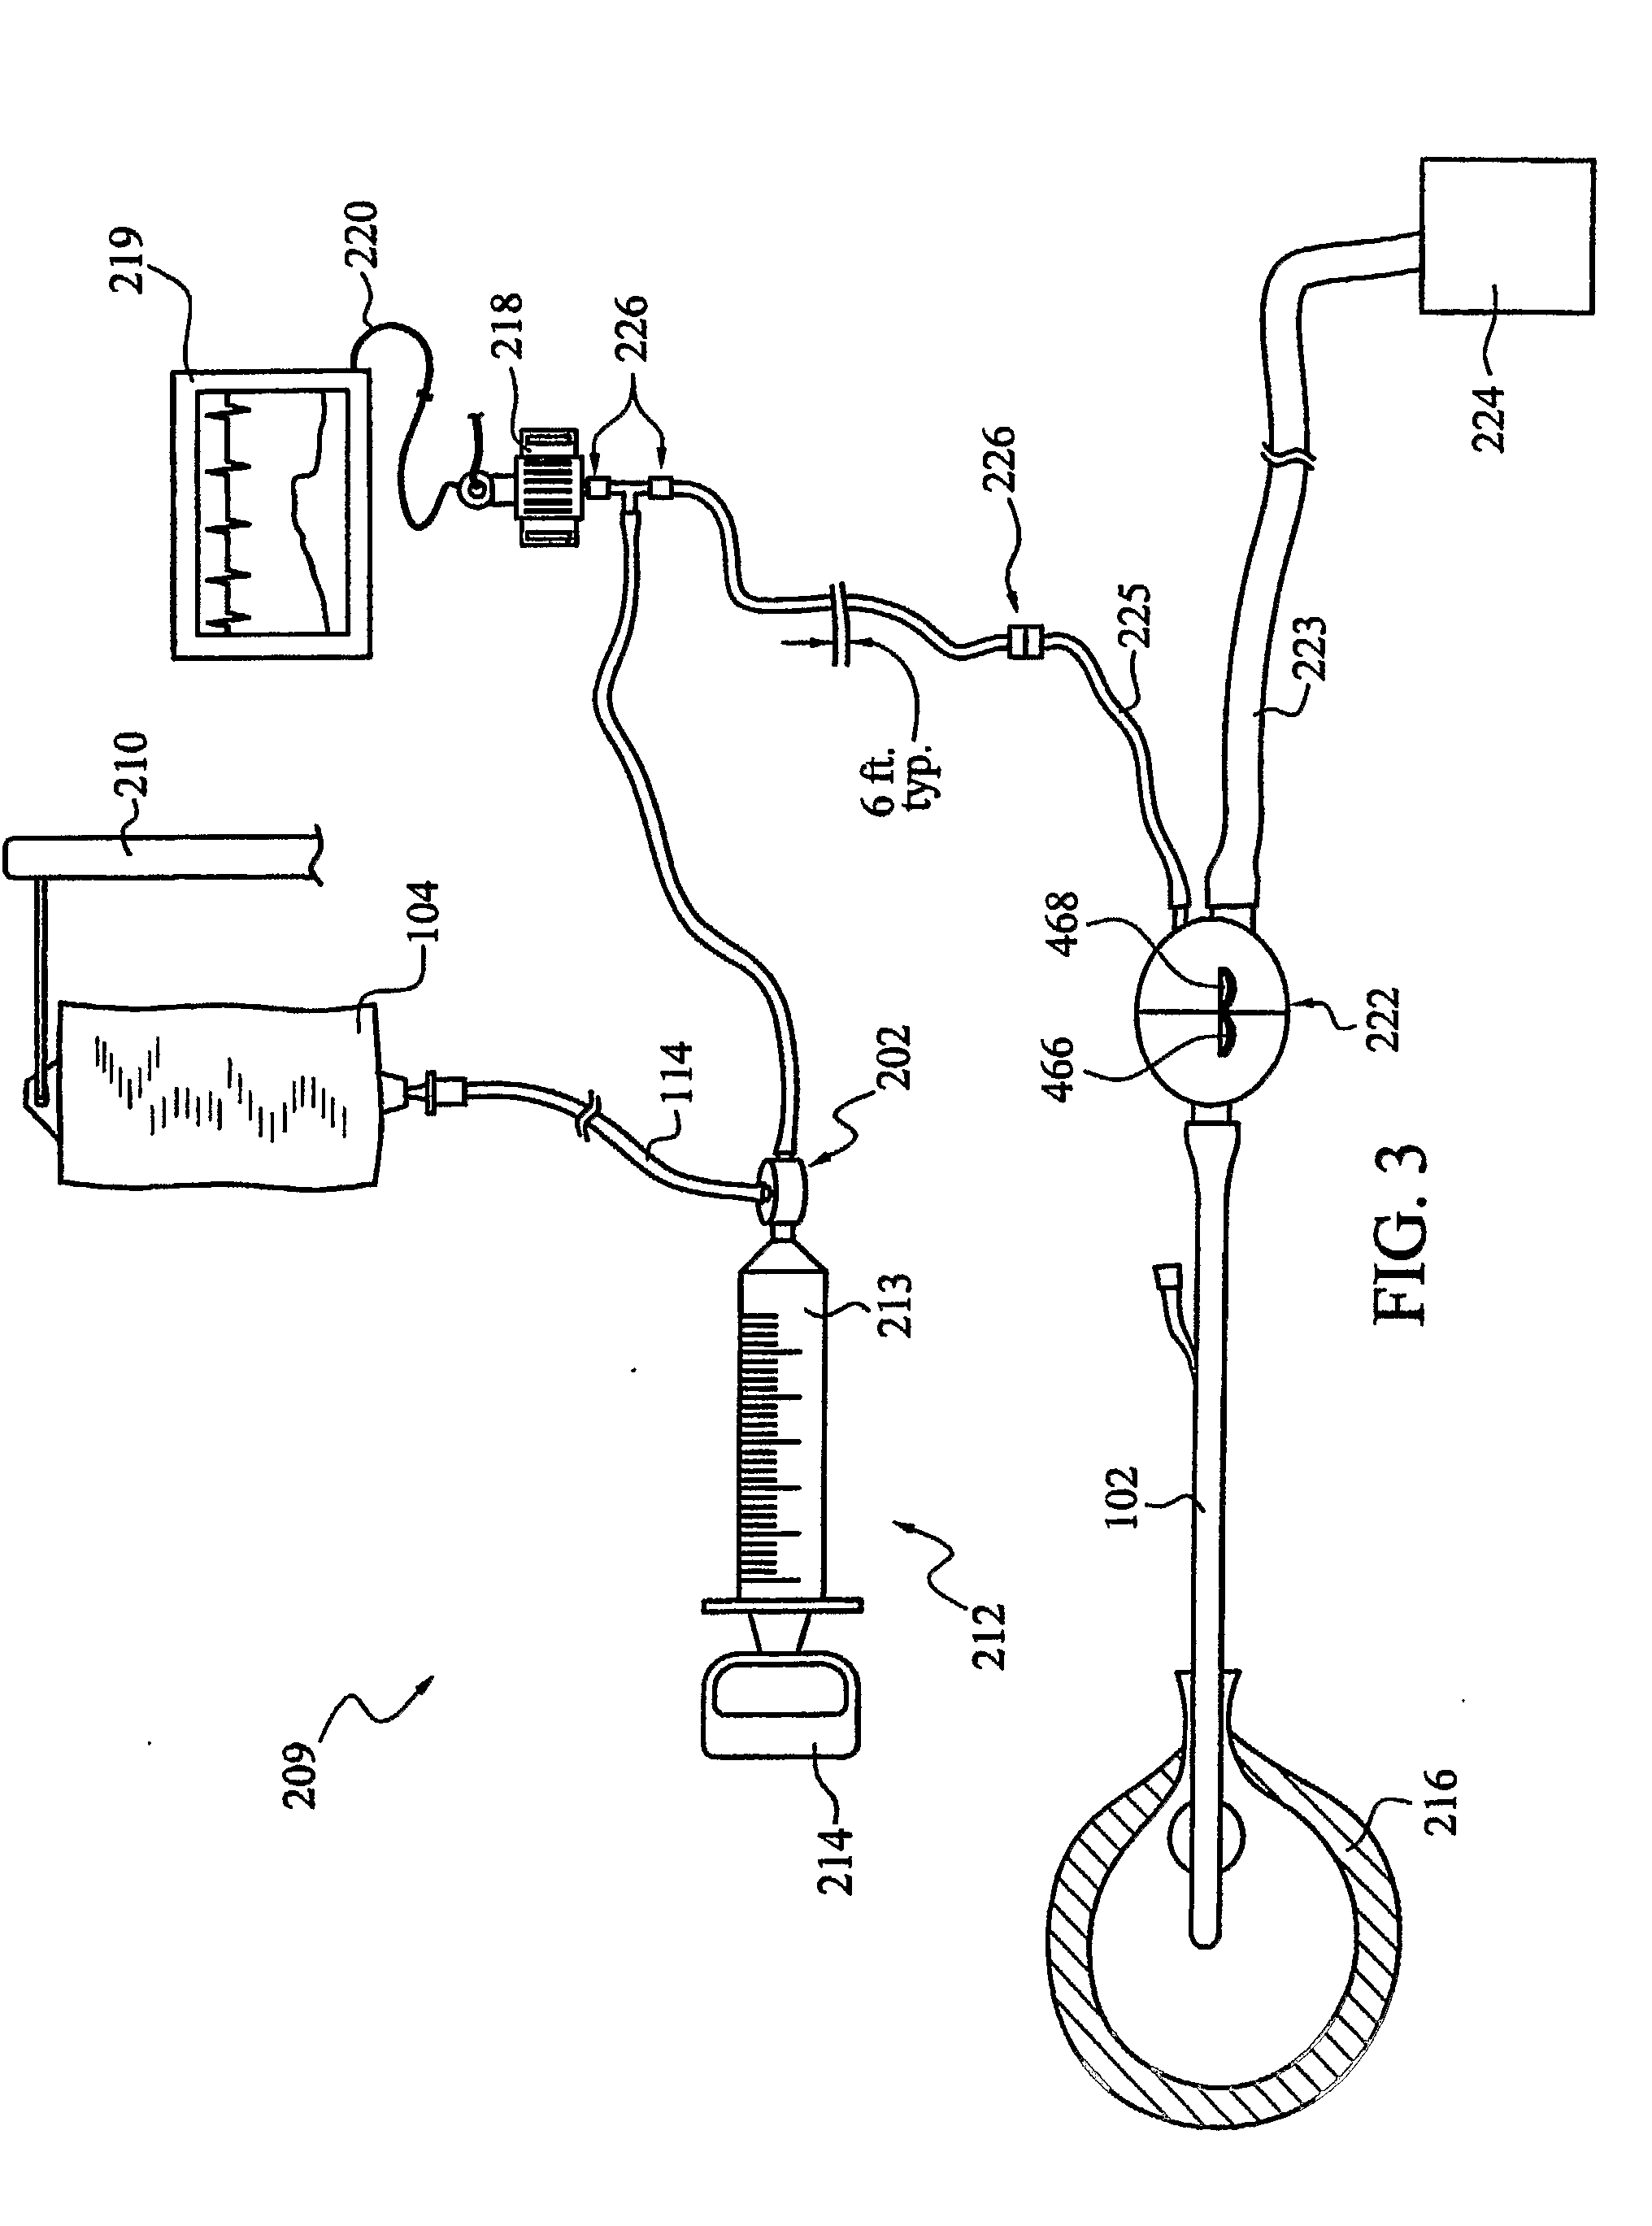 Intra-Abdominal Pressure Monitoring Device and Method